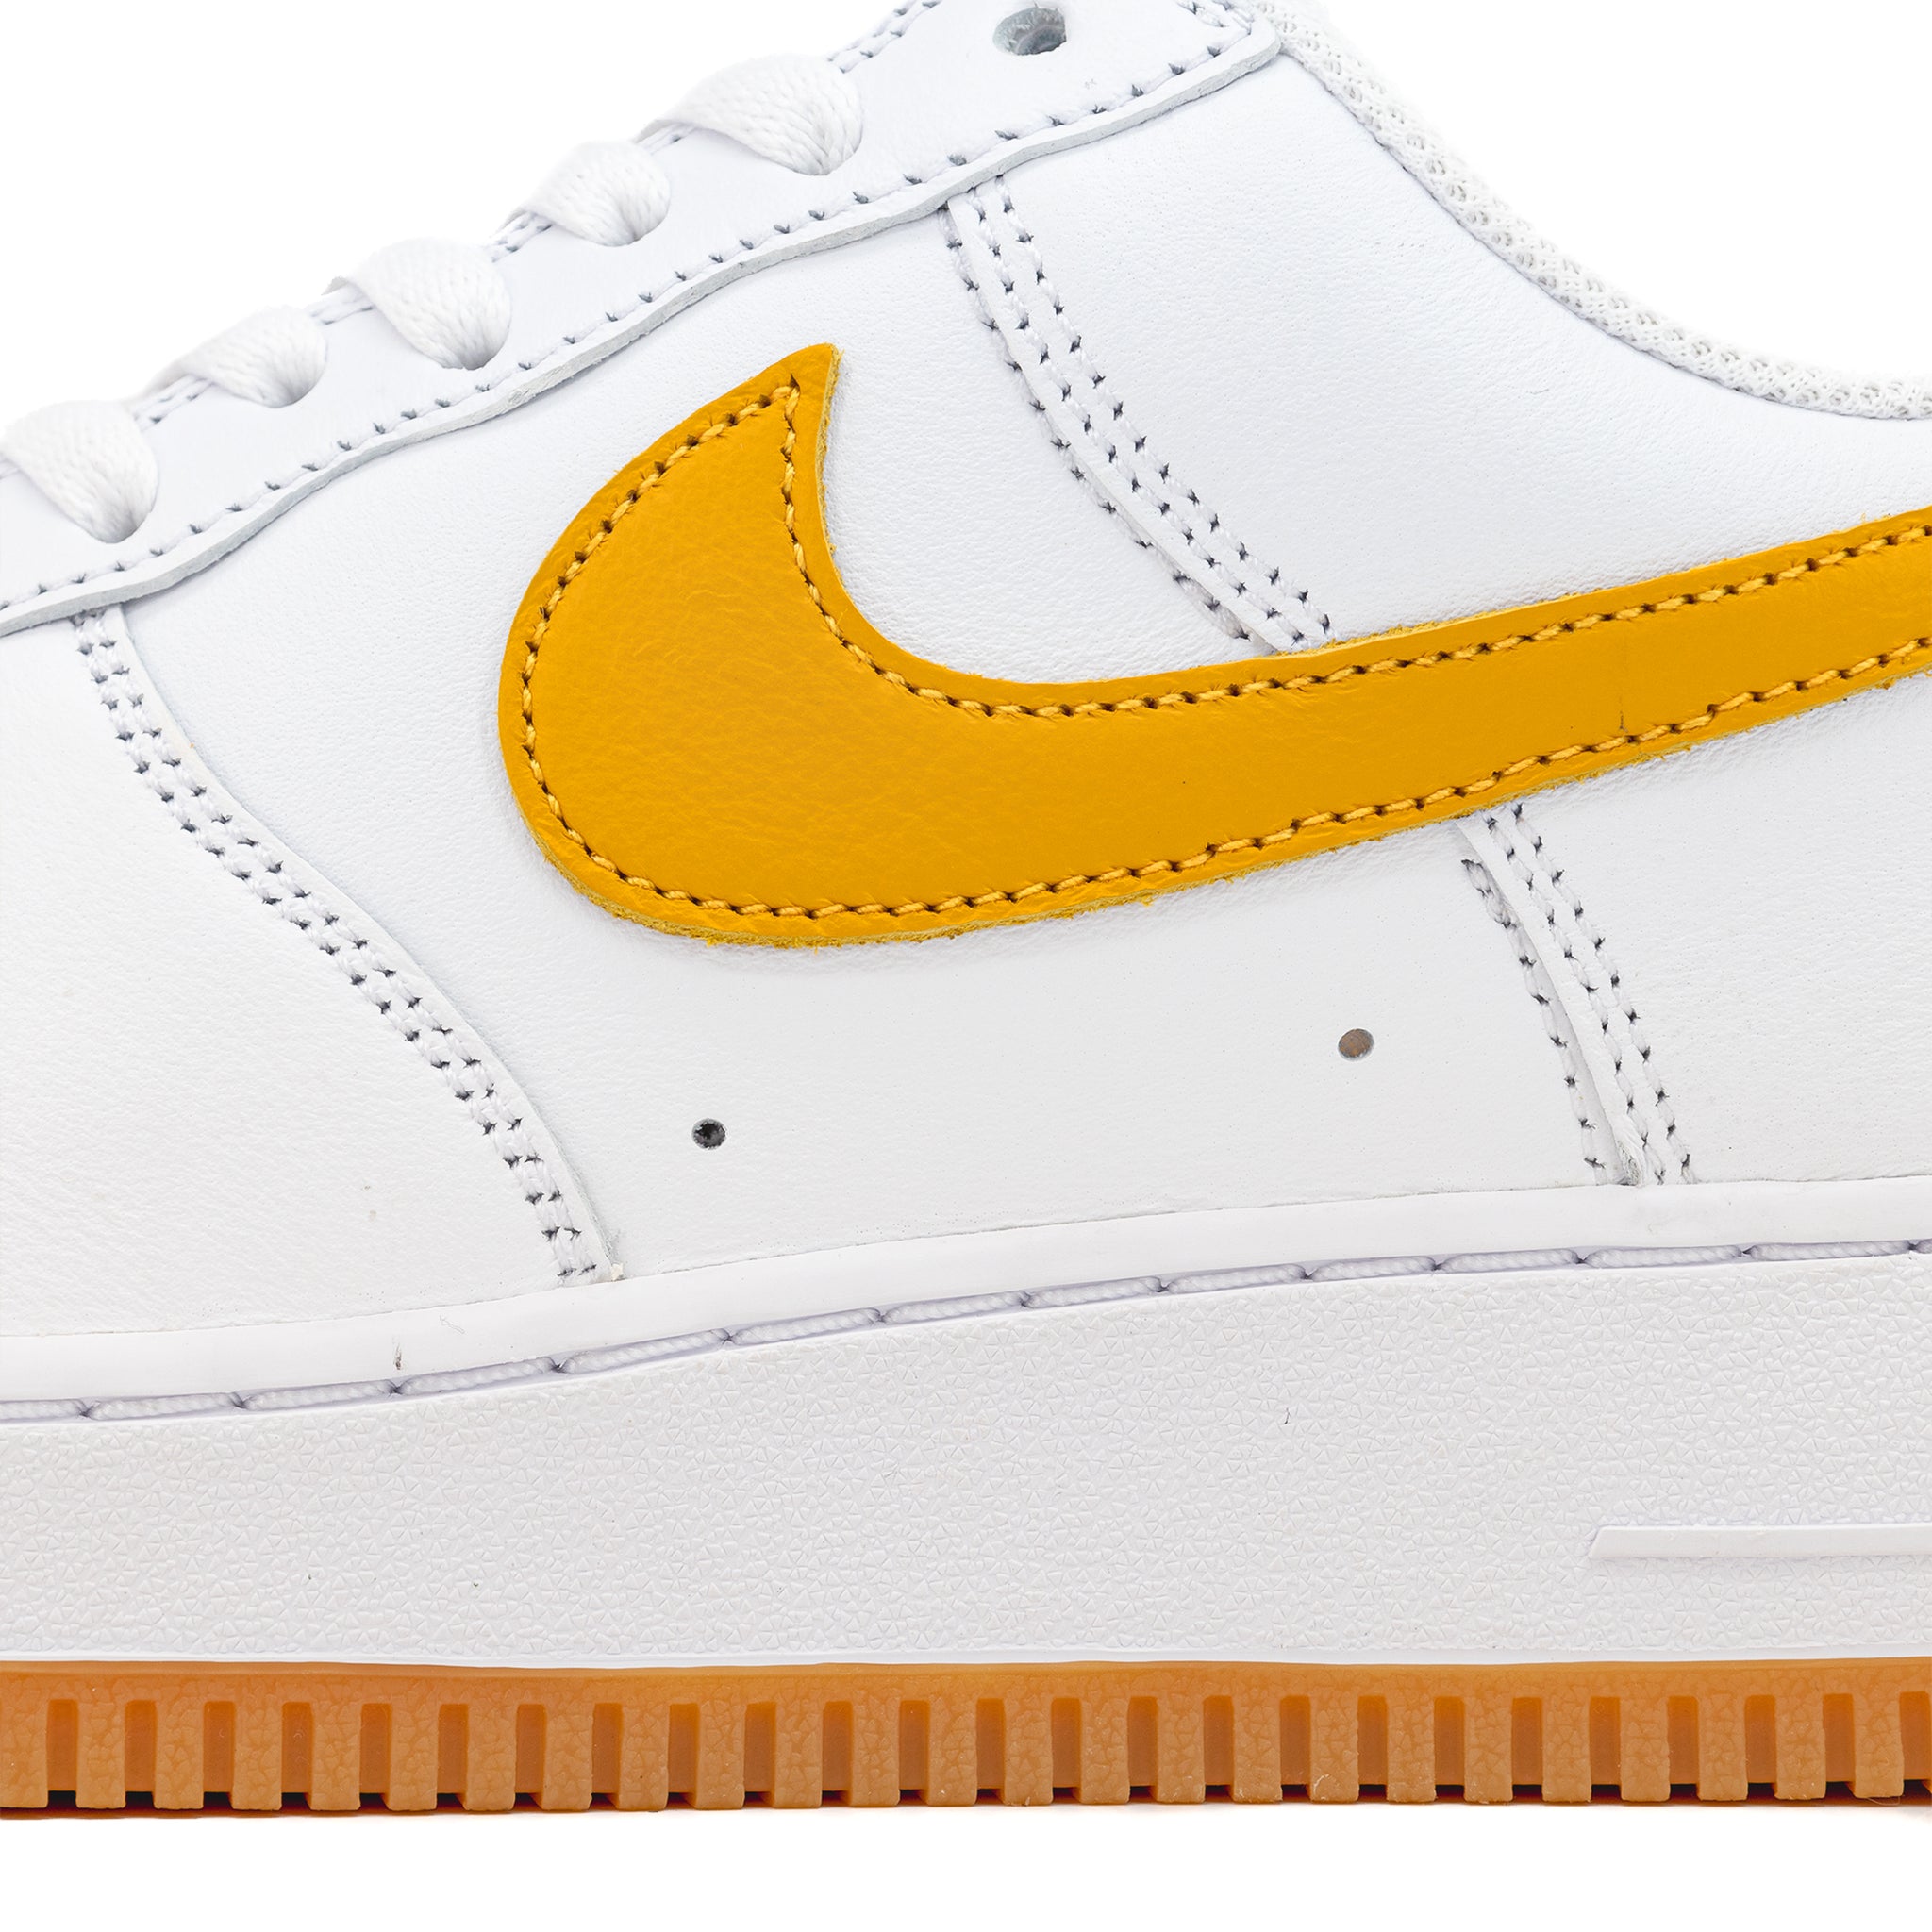 Nike Air Force 1 Low Retro QS University Gold FD7039-100 AF1 Shoes Sneakers